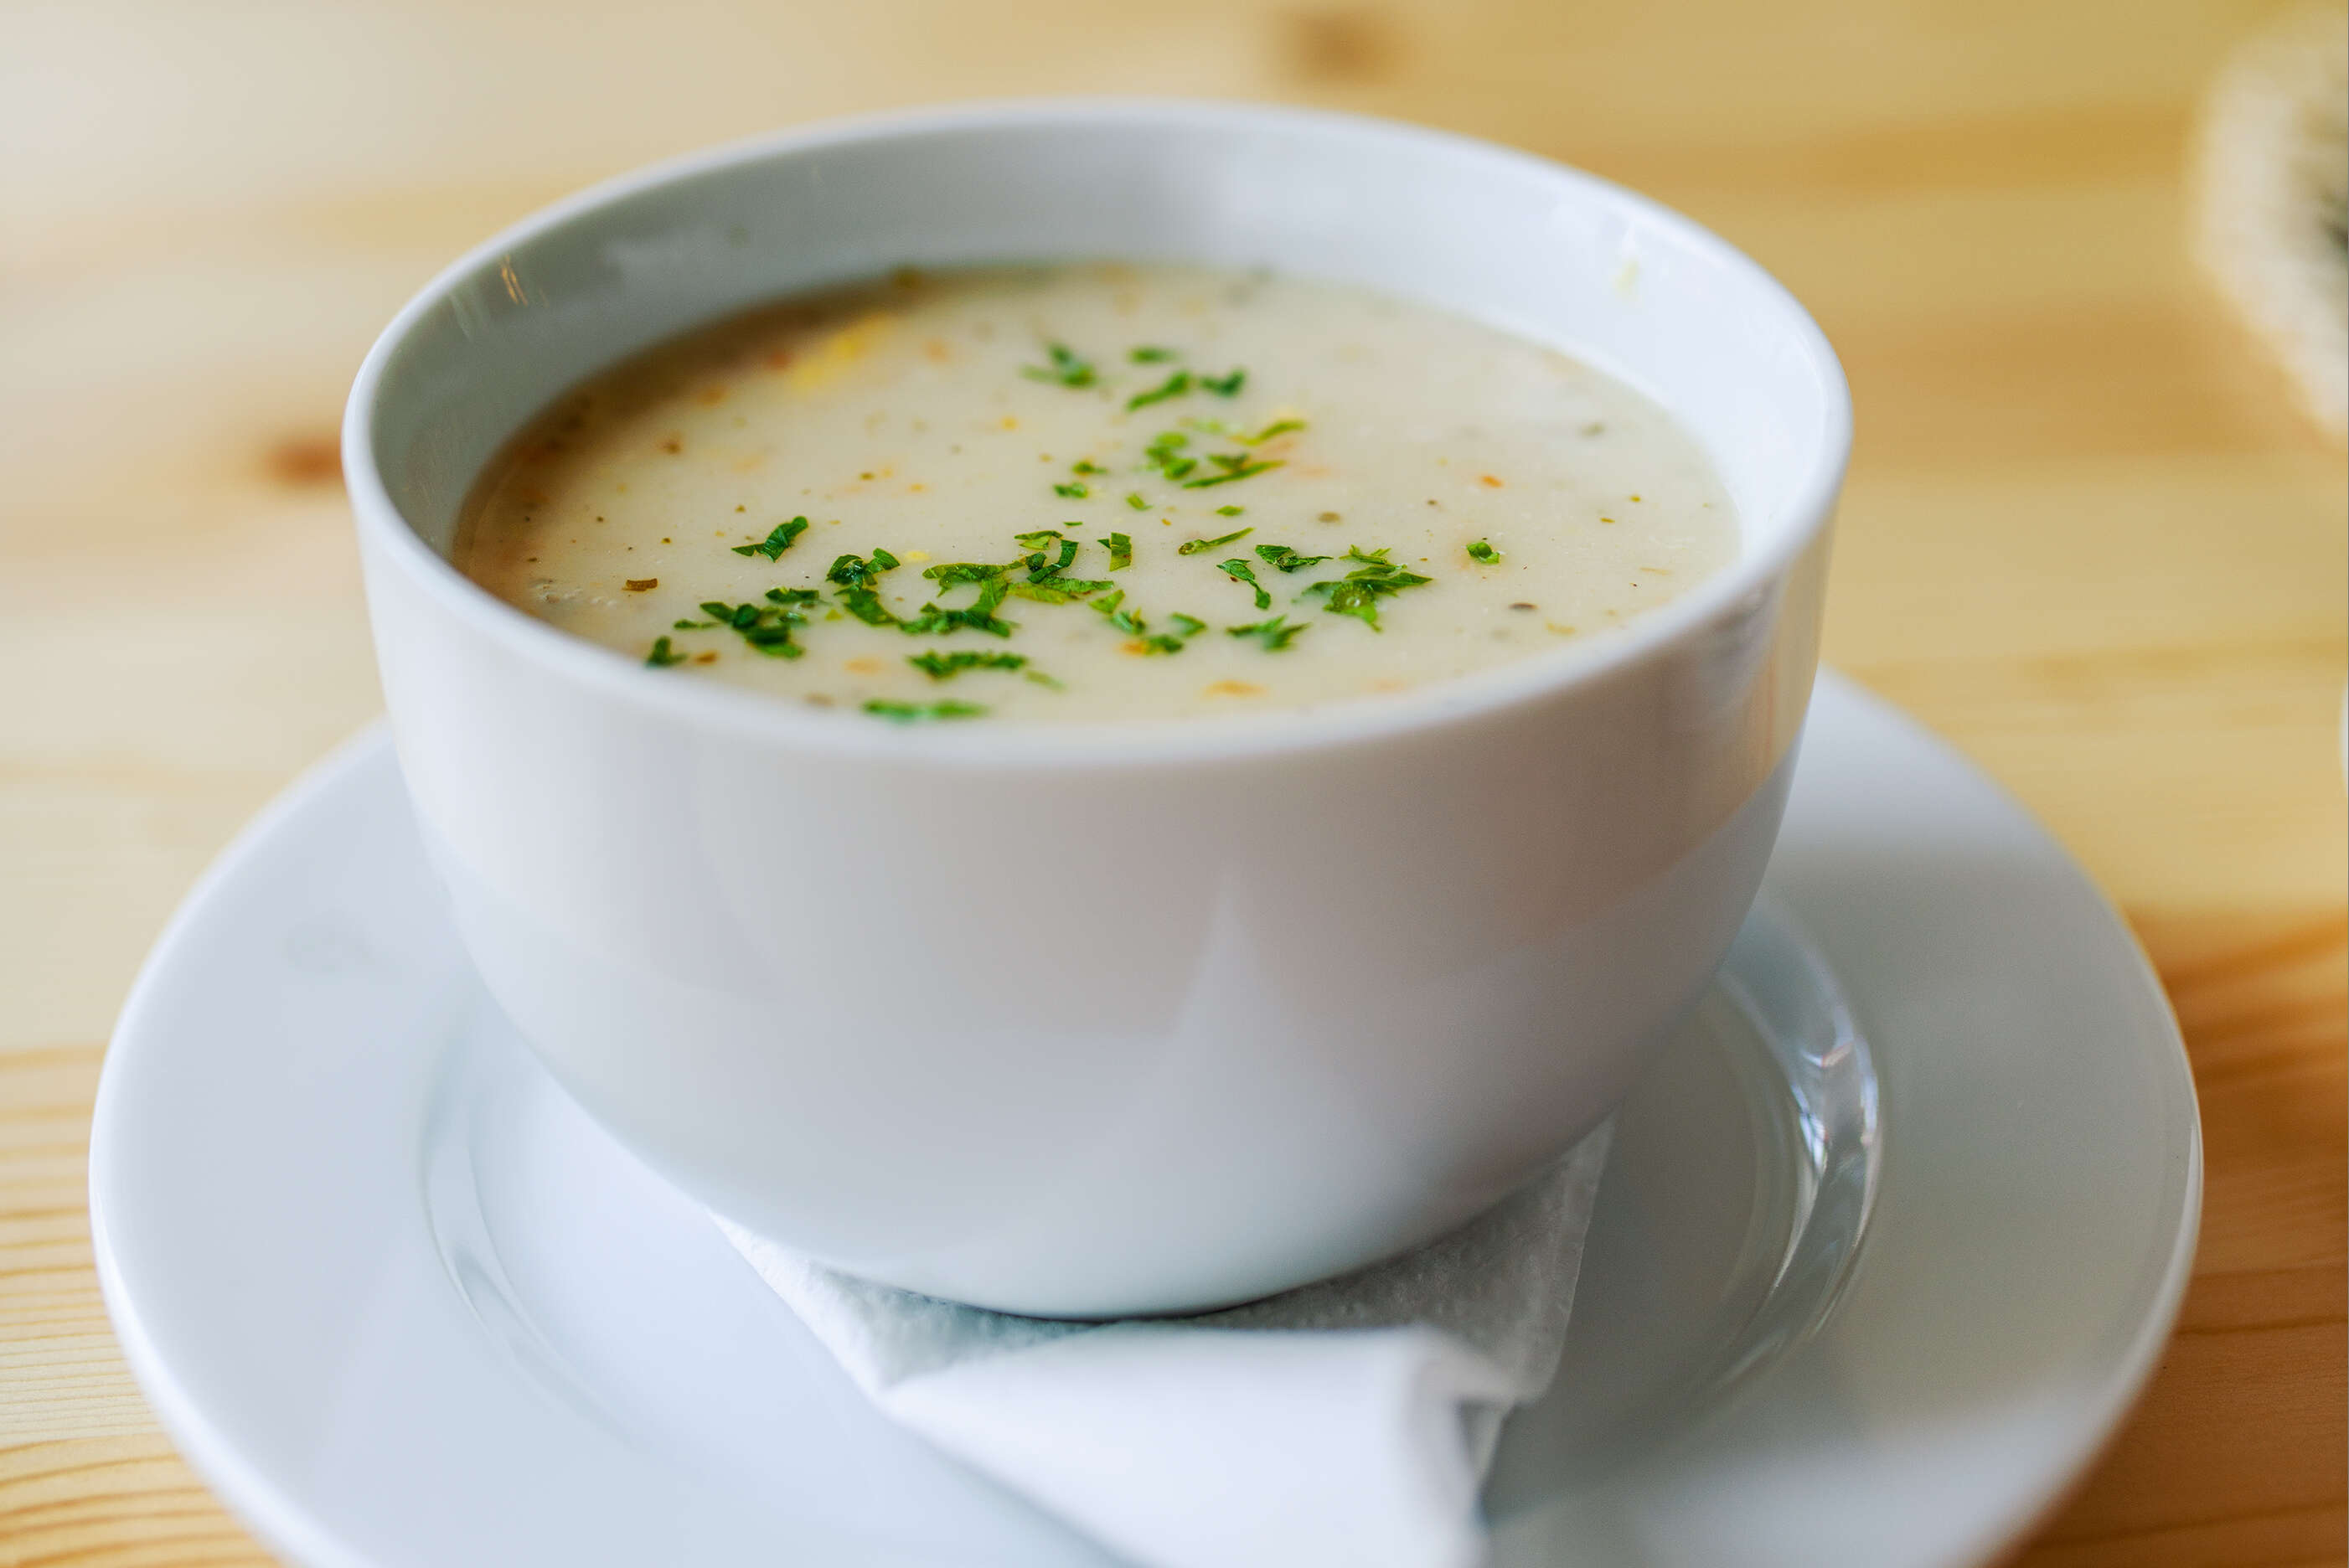 Creamy soup at table